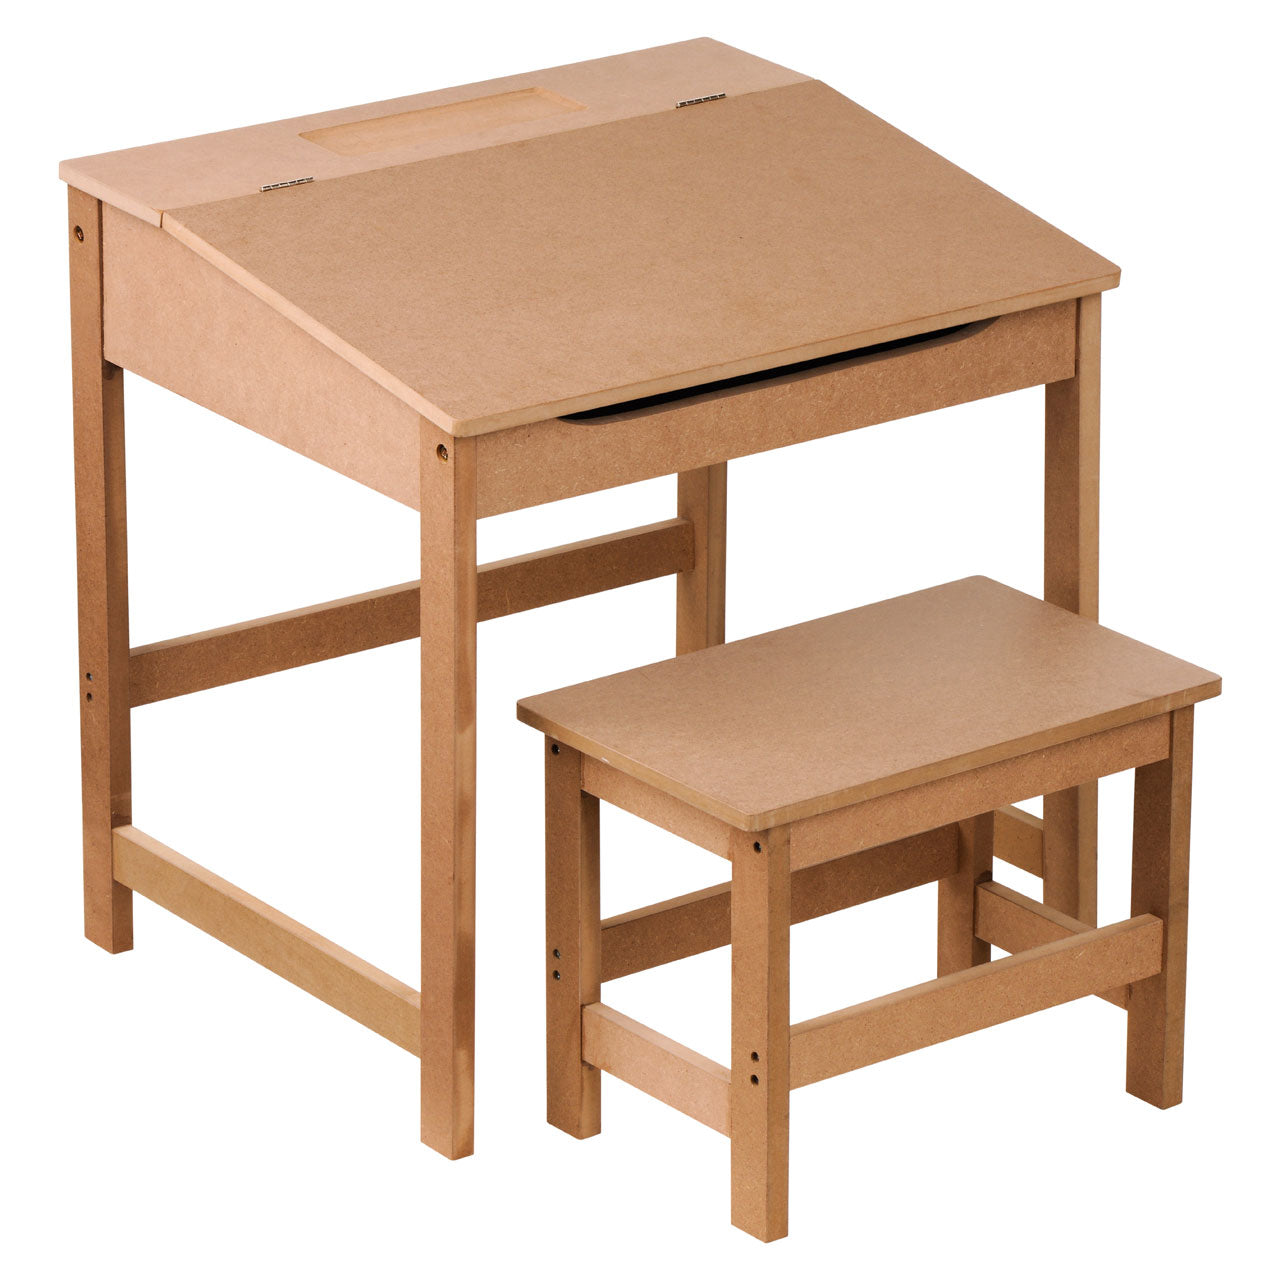 Kids Desk Table And Stool Chair Seat Furniture Set - Brown